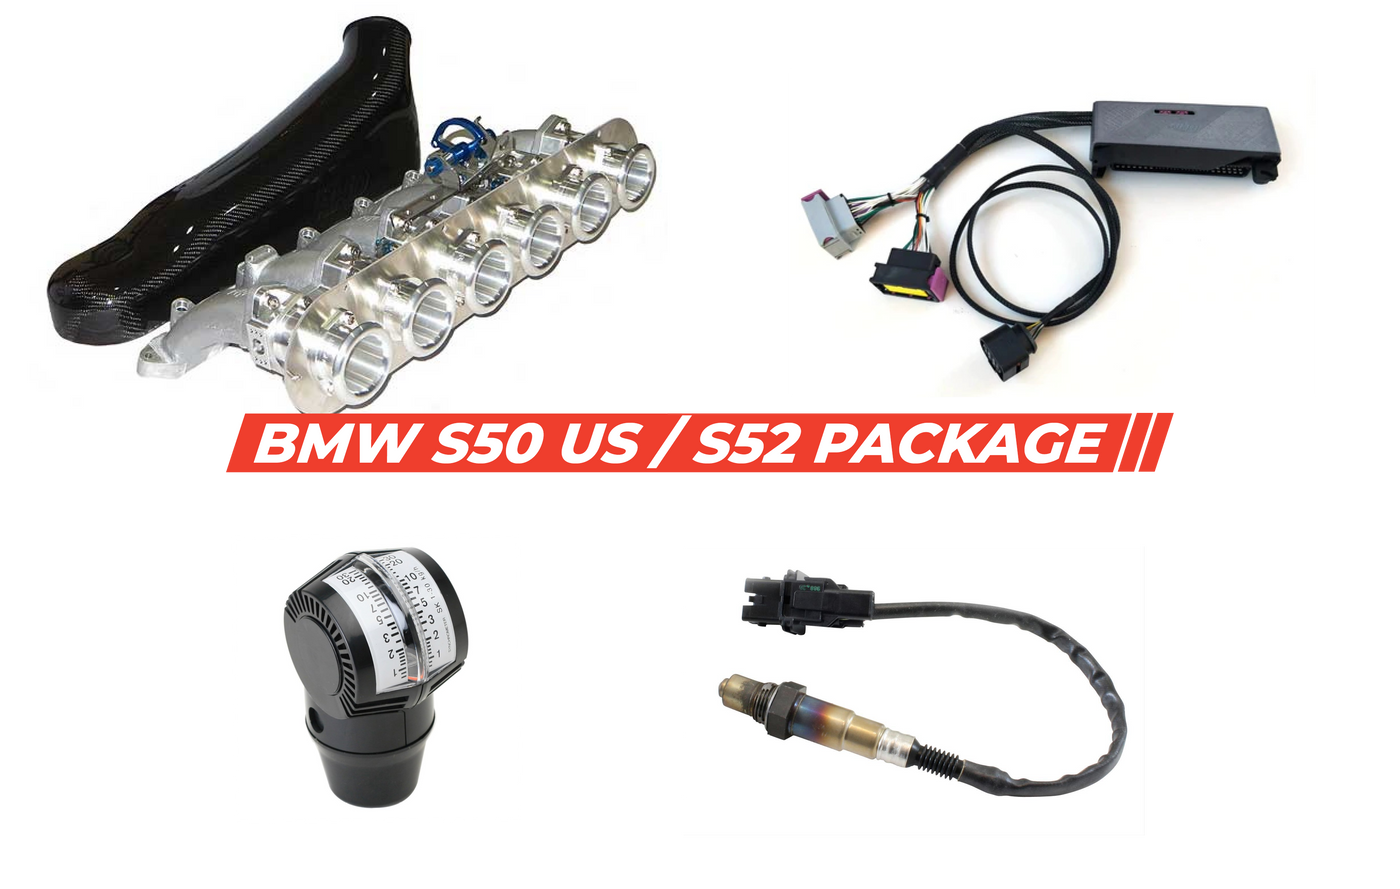 BMW S50B30US / S52 - ADAPTER ITB CONVERSION PACKAGE [FOR E36 M3]